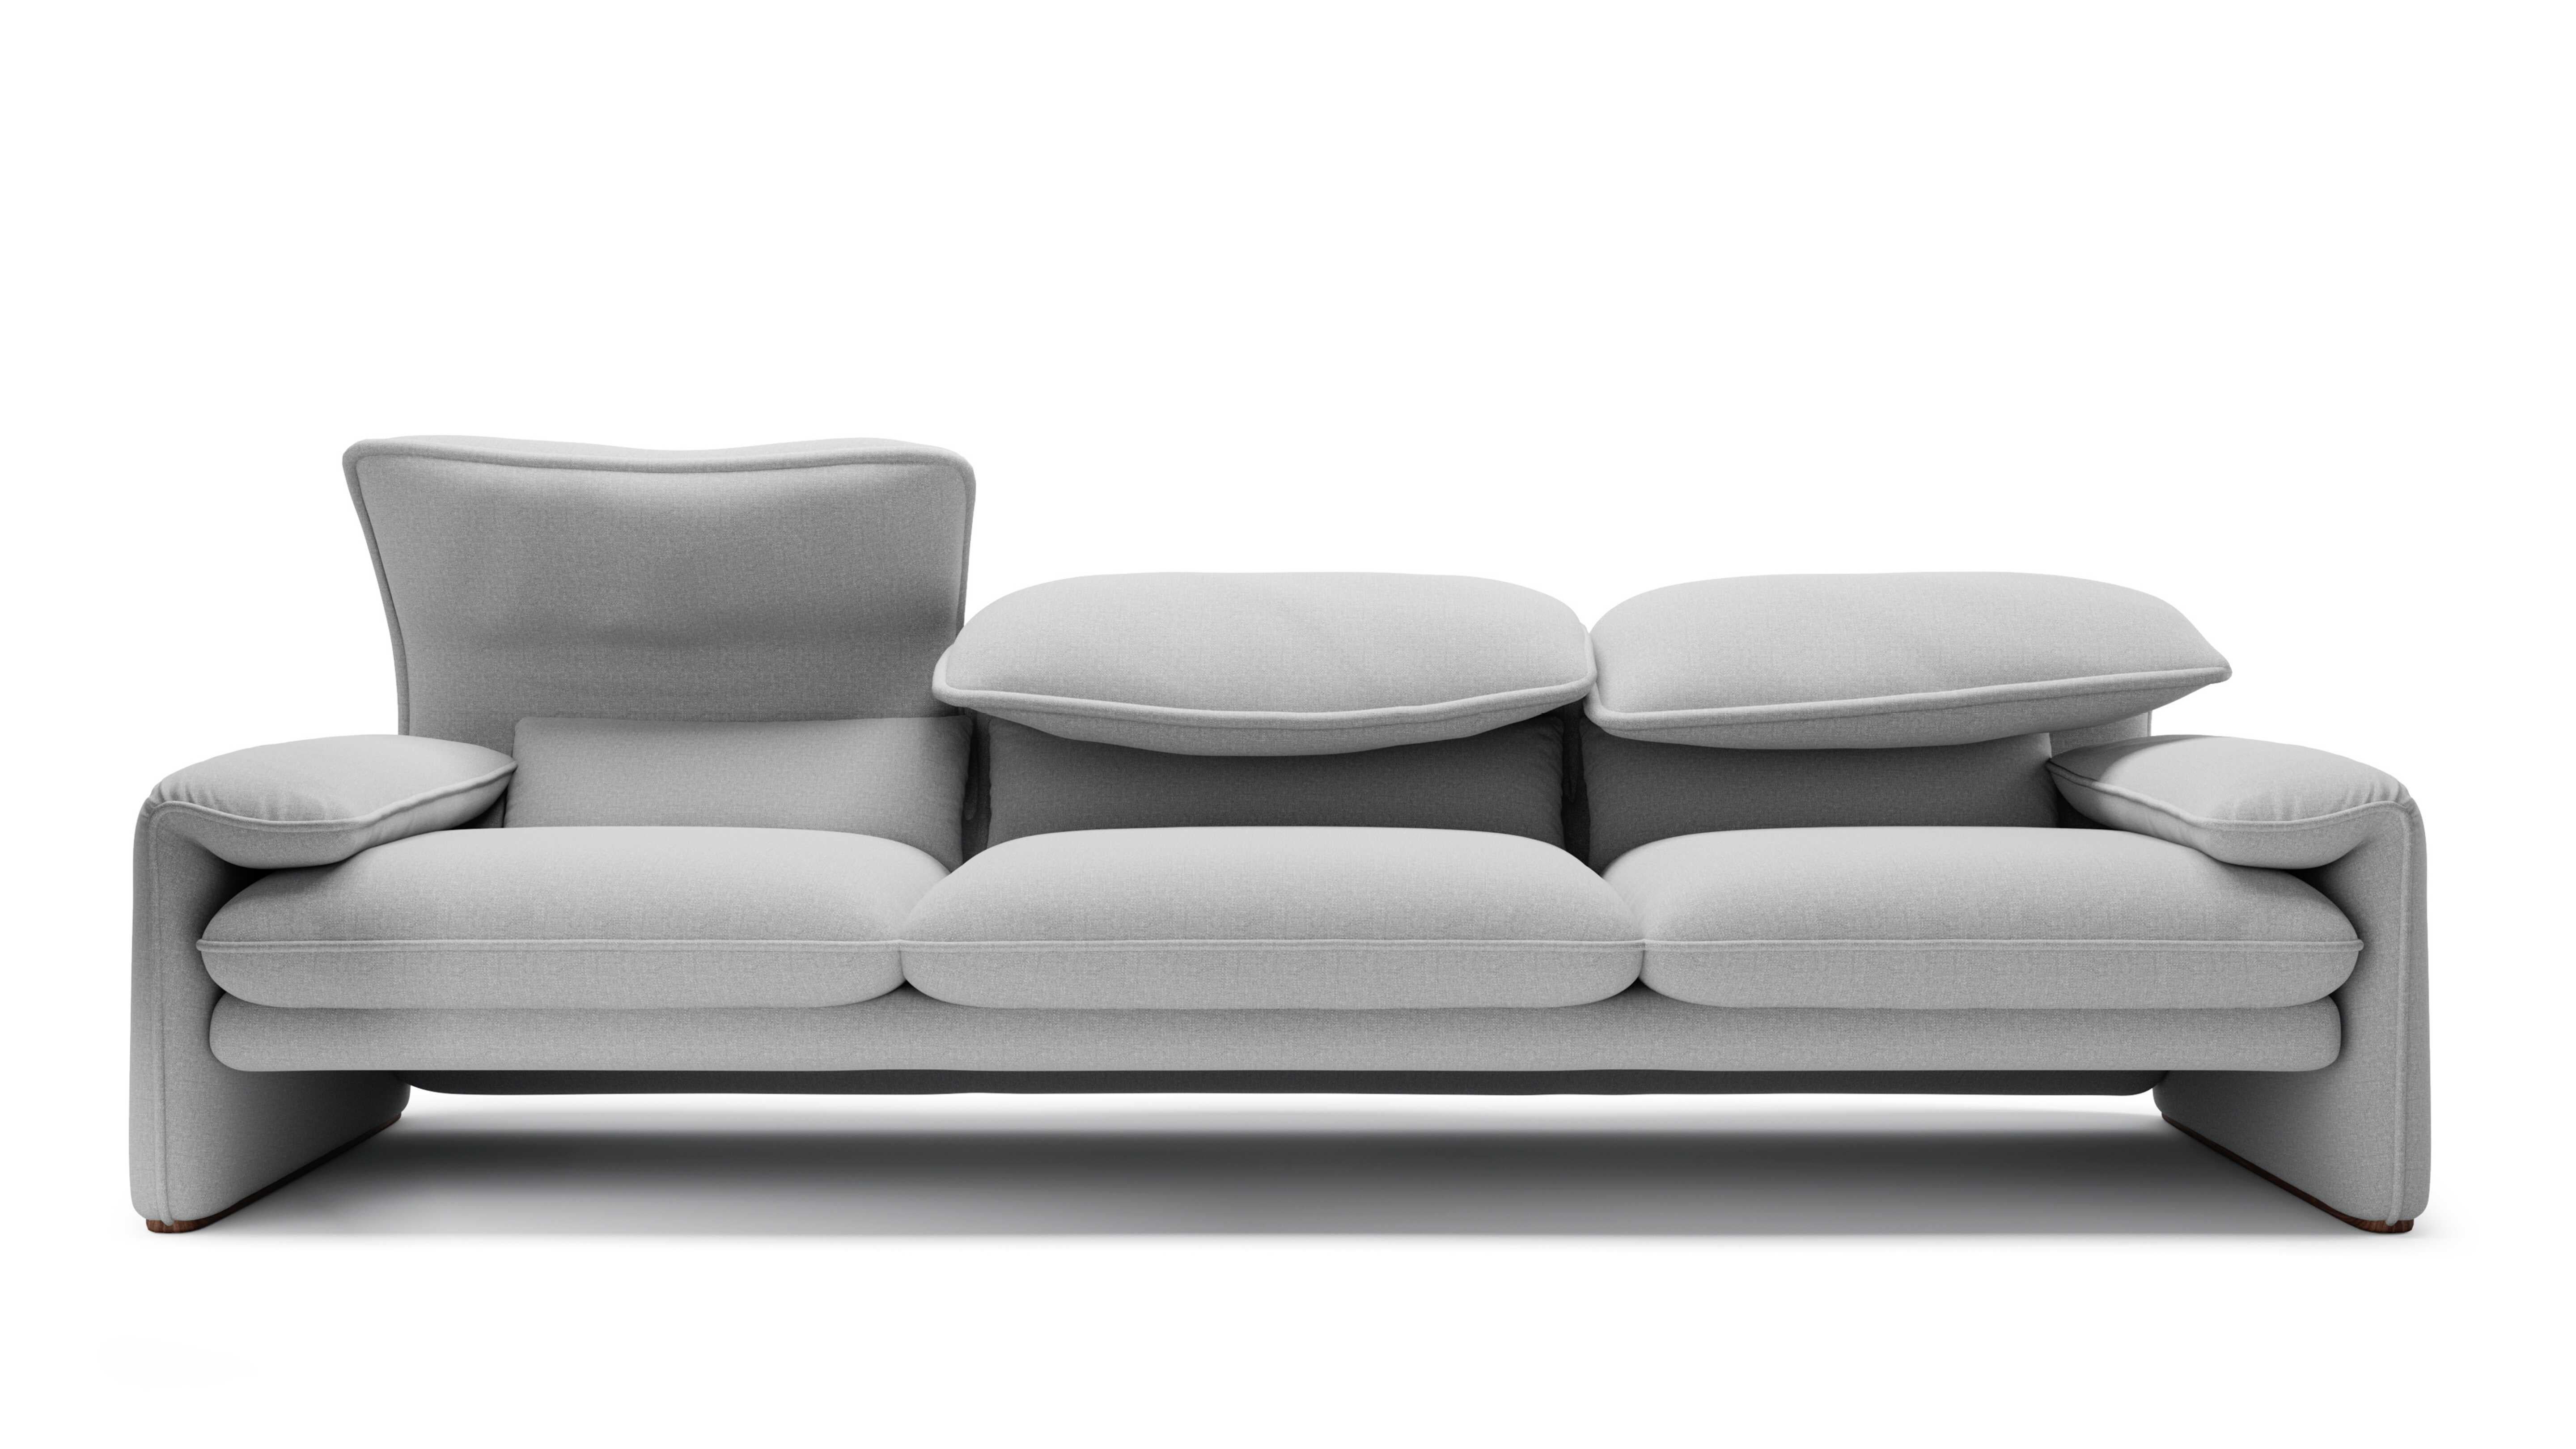 The two-seater is available in 204cm or 214cm width. The three-seater is available in 300cm or 310cm width. The price of the sofa is dependent on the chosen fabric and size. 

The iconic Maralunga by Vico Magistretti, international bestseller